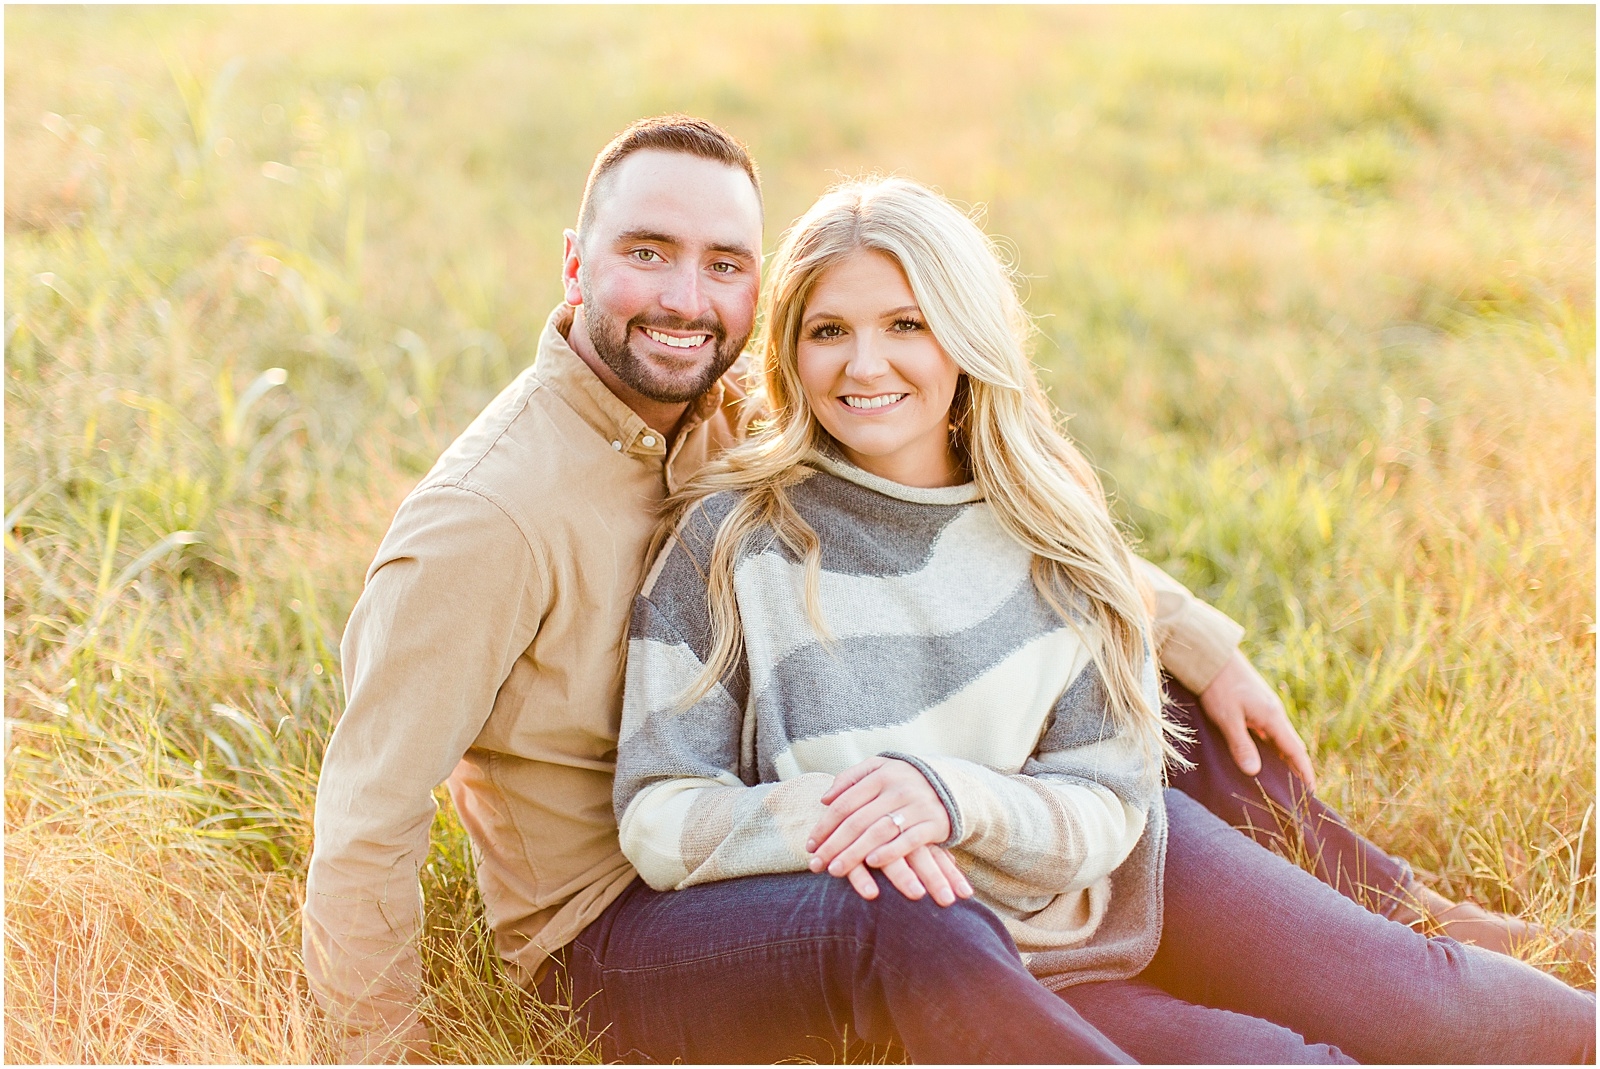 A Southern Indiana Engagement Session | Charleston and Erin | Bret and Brandie Photography042.jpg